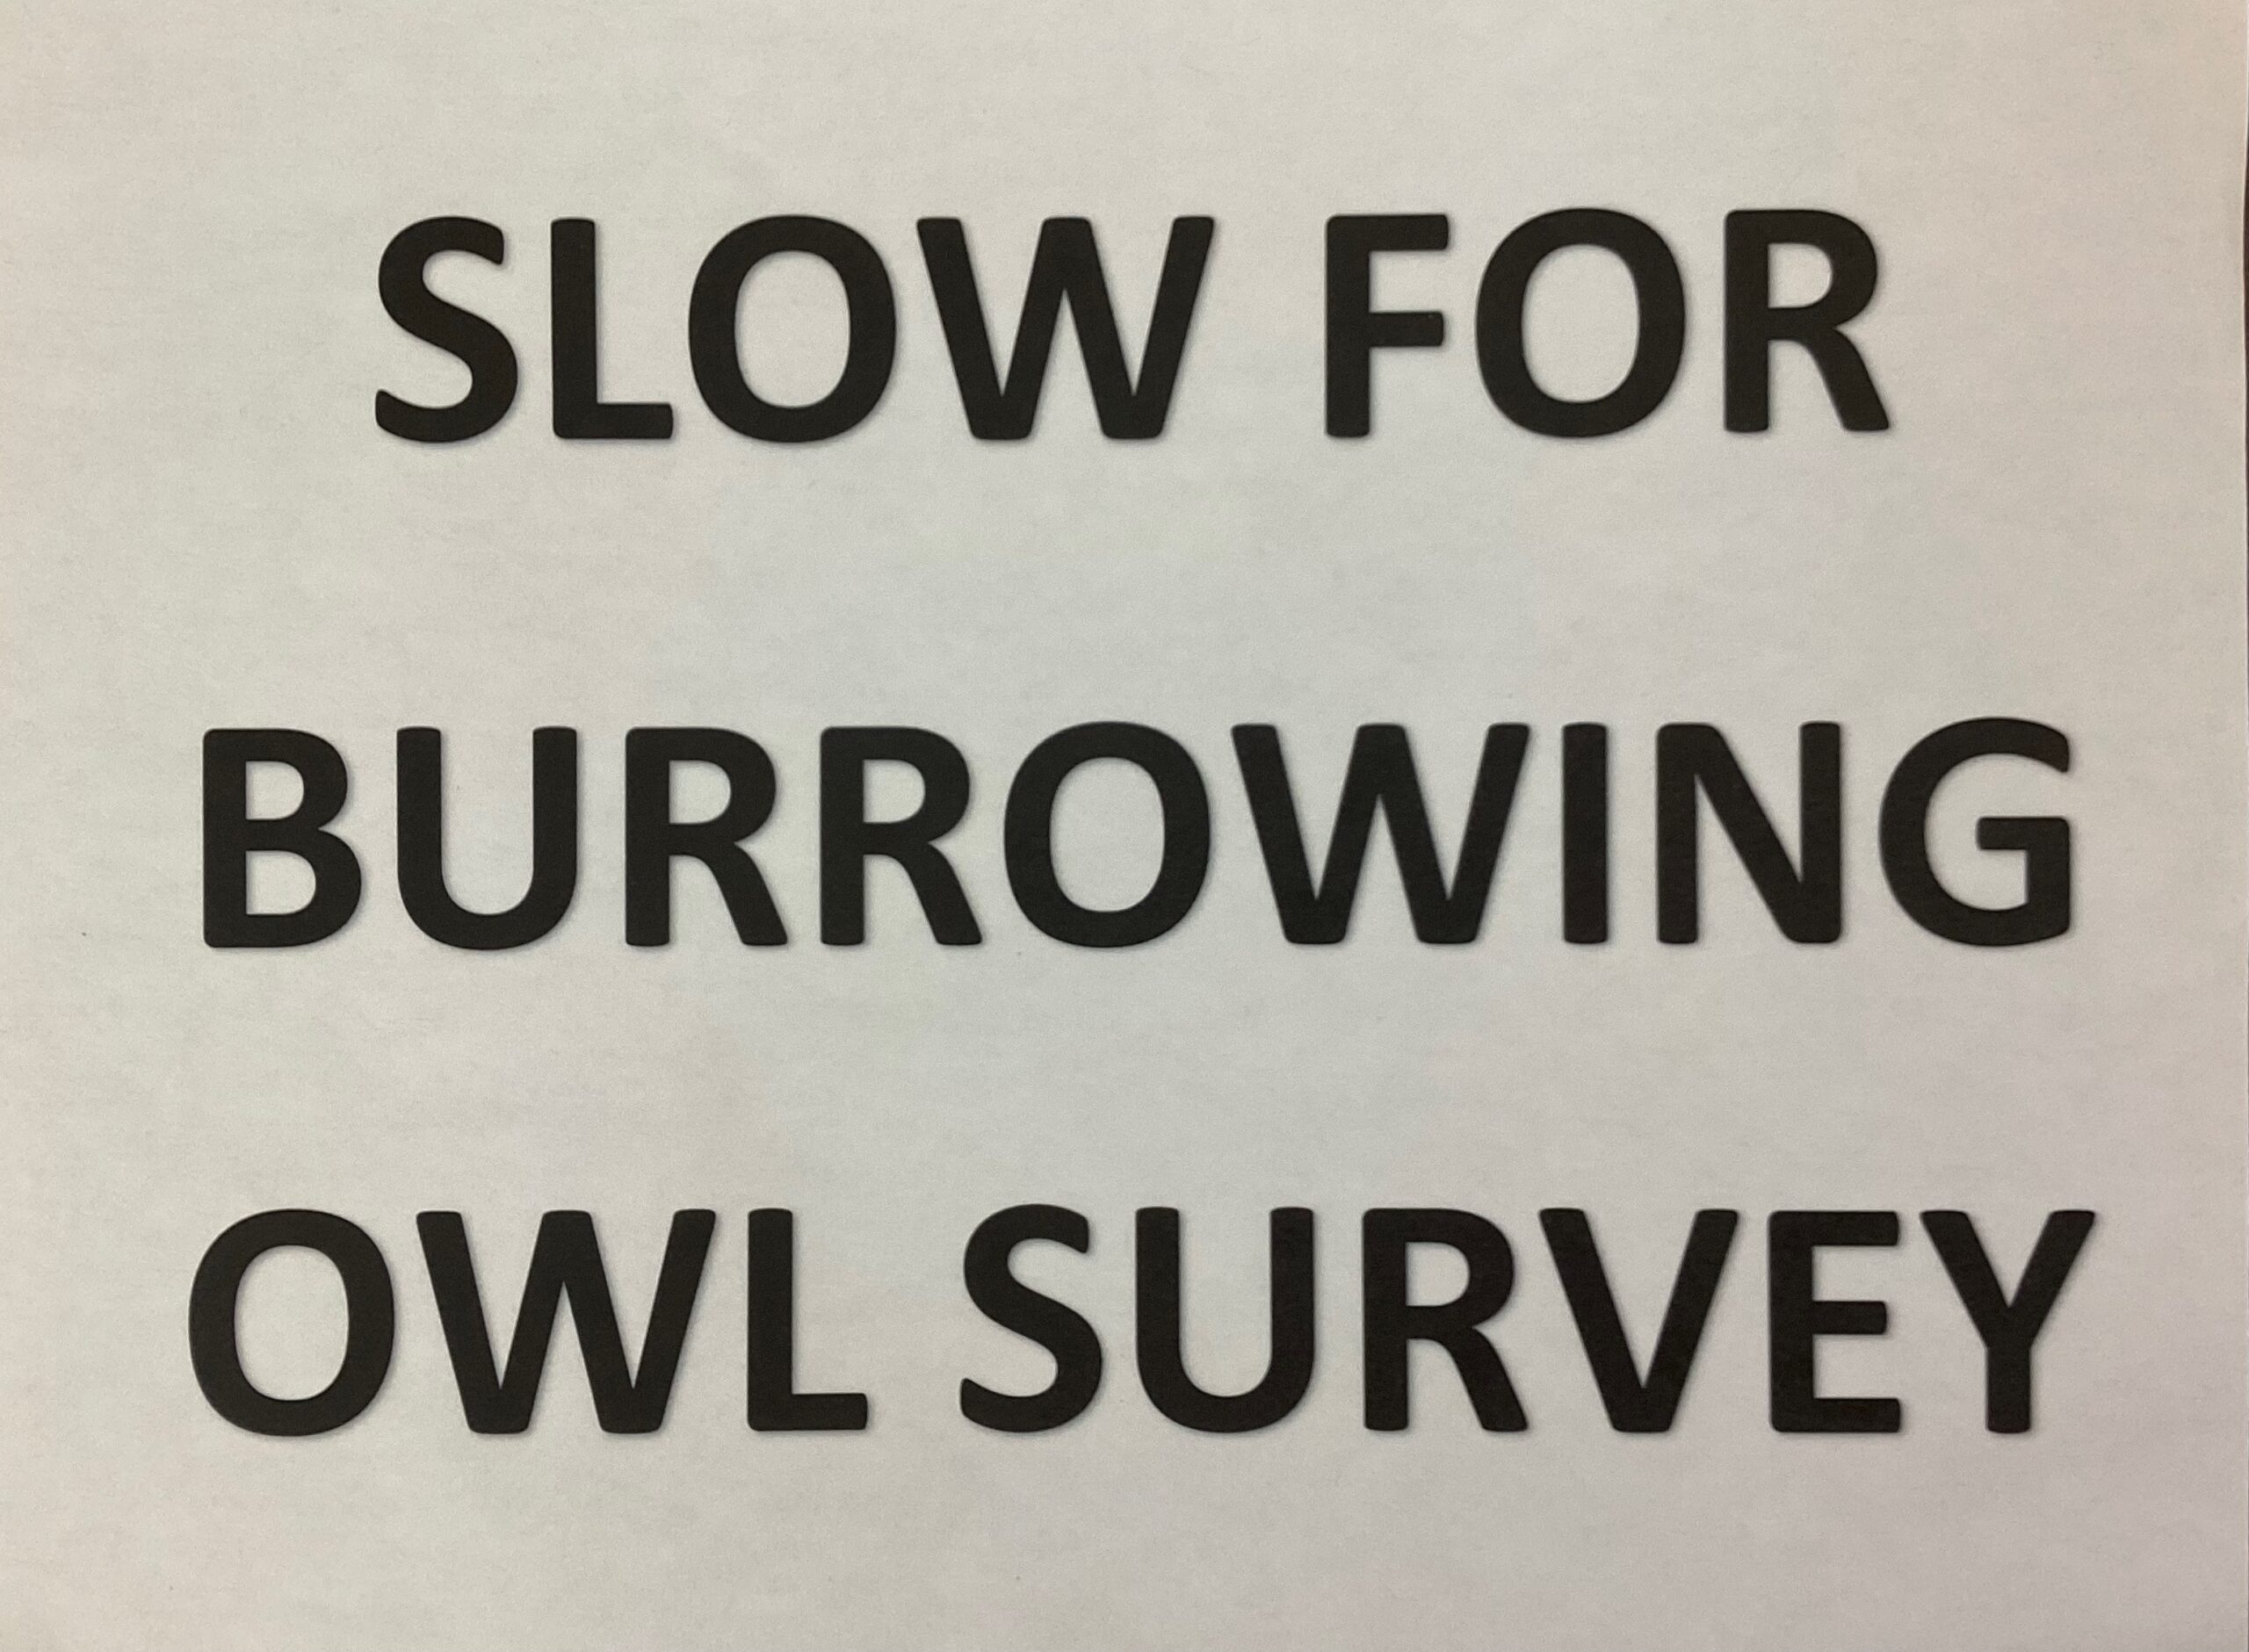 Slow for survey